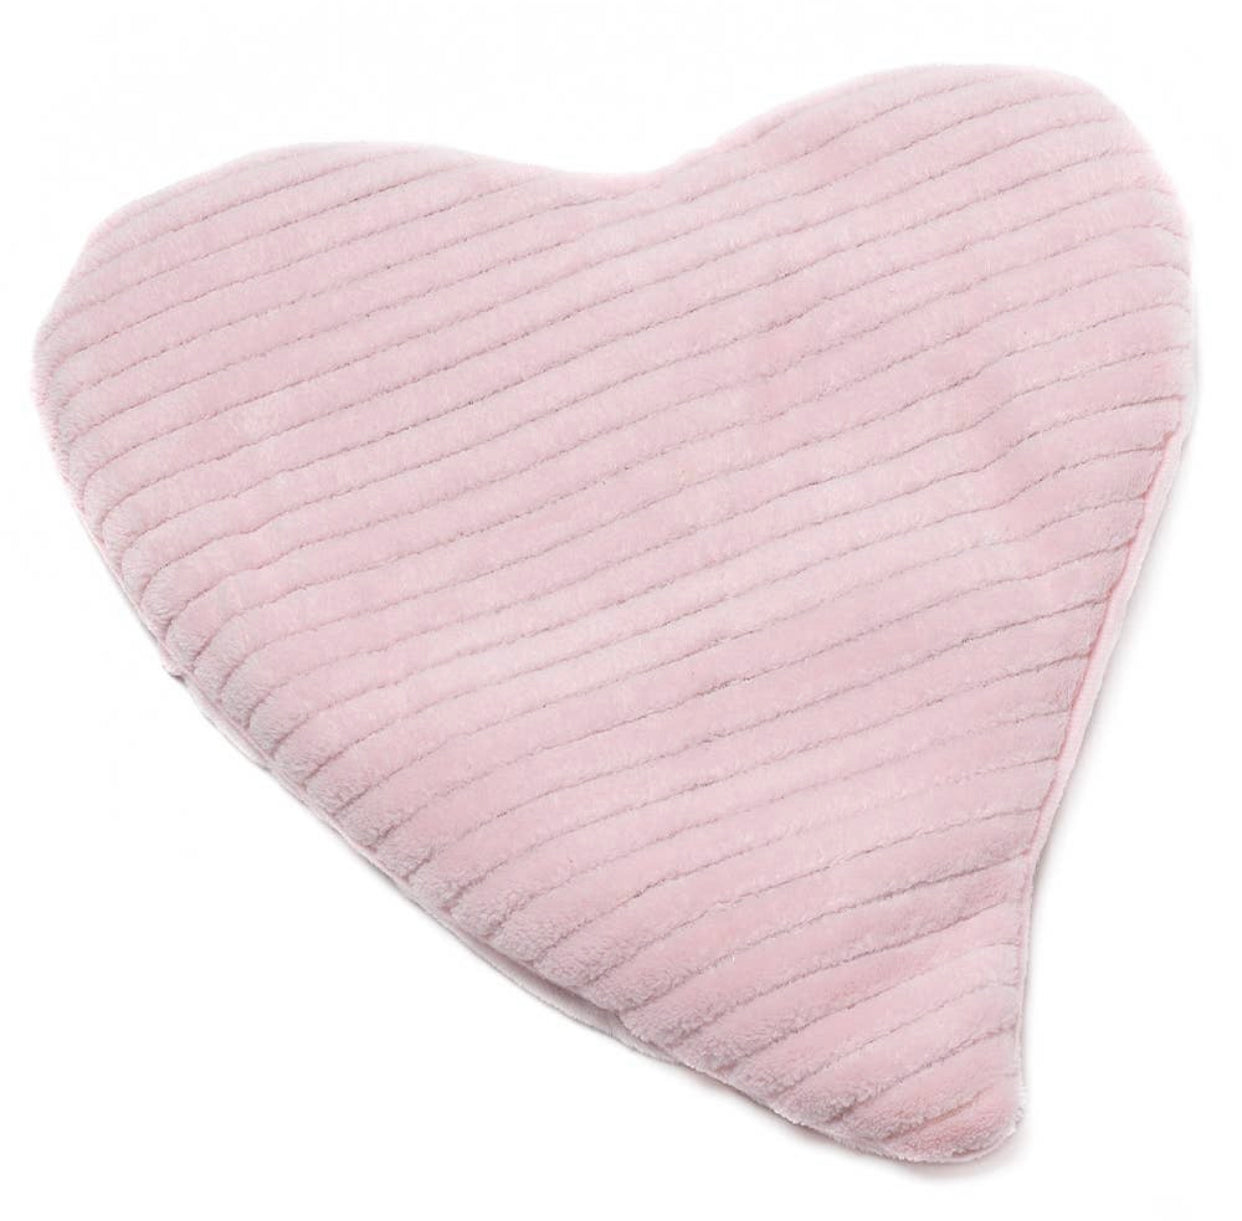 Warmies Spa Therapy Heart Pad, Pink